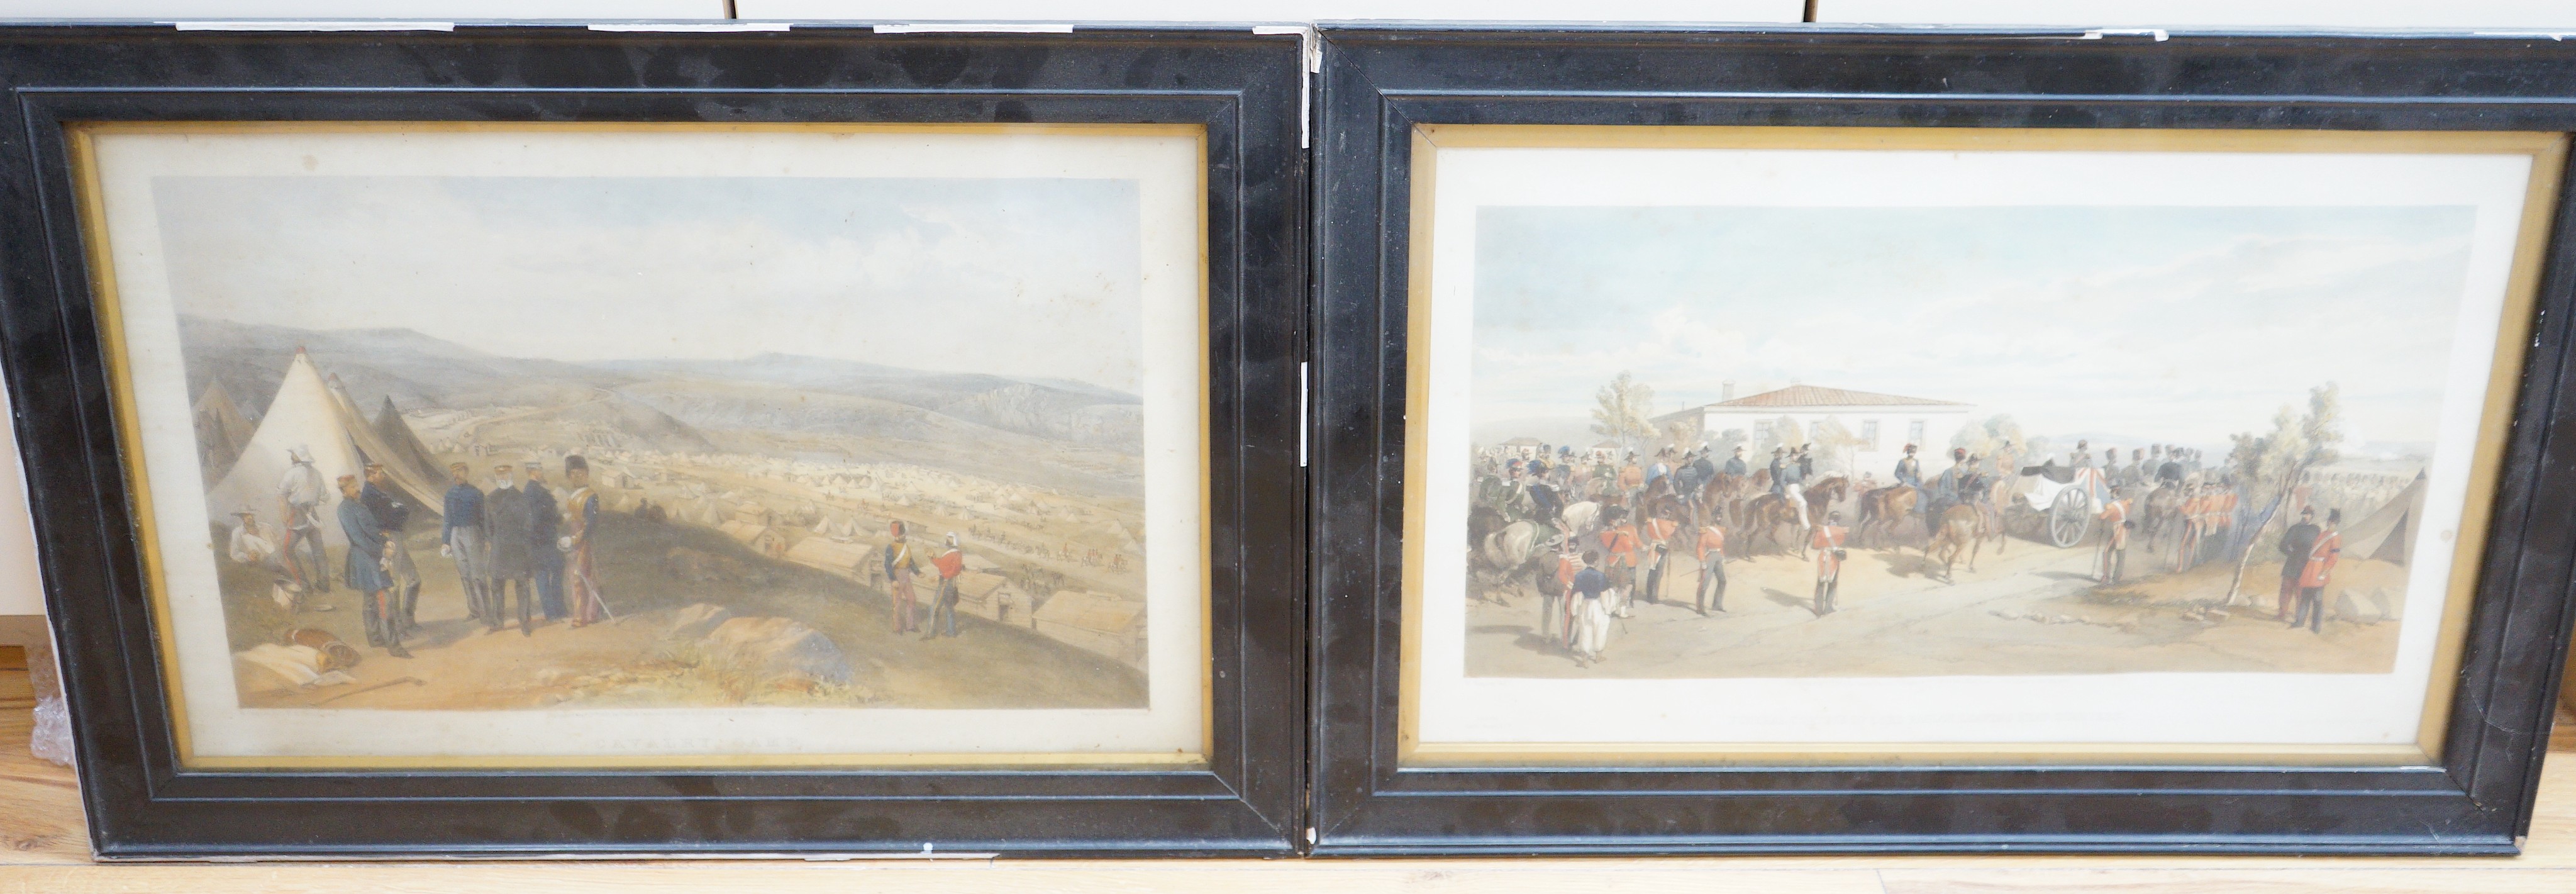 Bryson after Simpson, two coloured lithographs, Scenes from the Crimea, 'Cavalry Camp' and 'Funeral Cortege of Lord Raglan leaving headquarters', 1855, 33 x 52cm